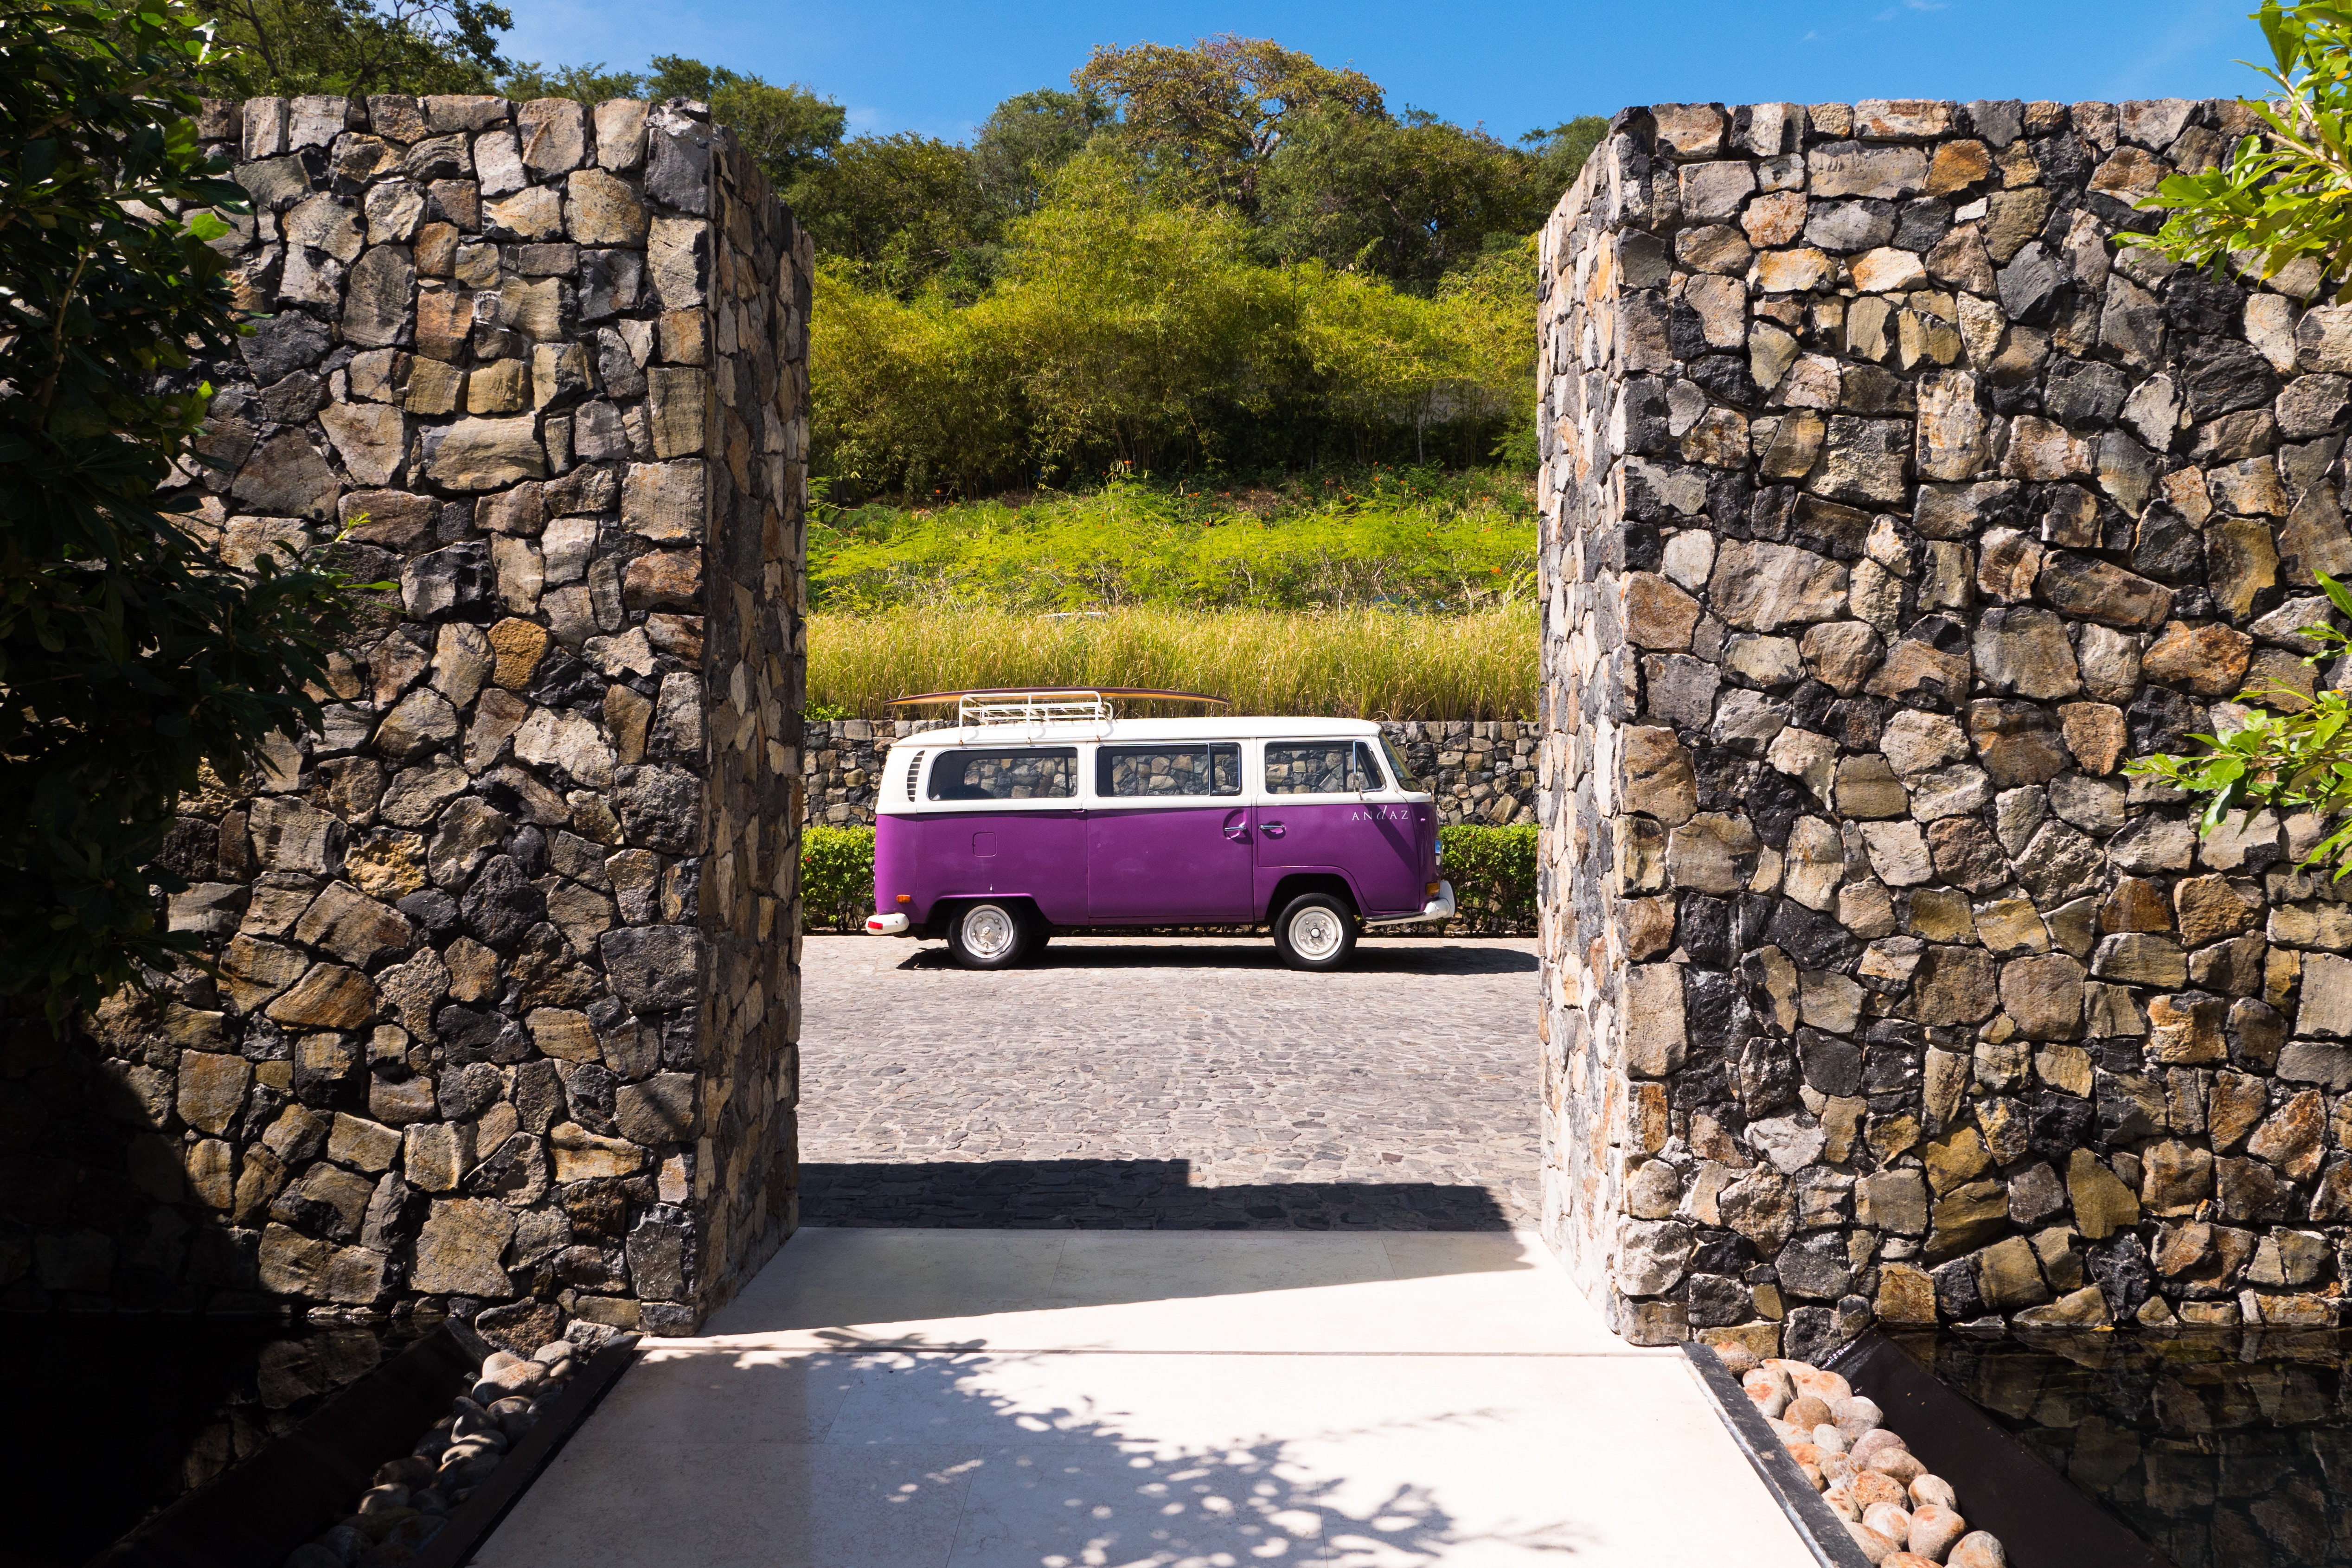 white and pruple van parked near stone work during day time in Costa Rica scenary